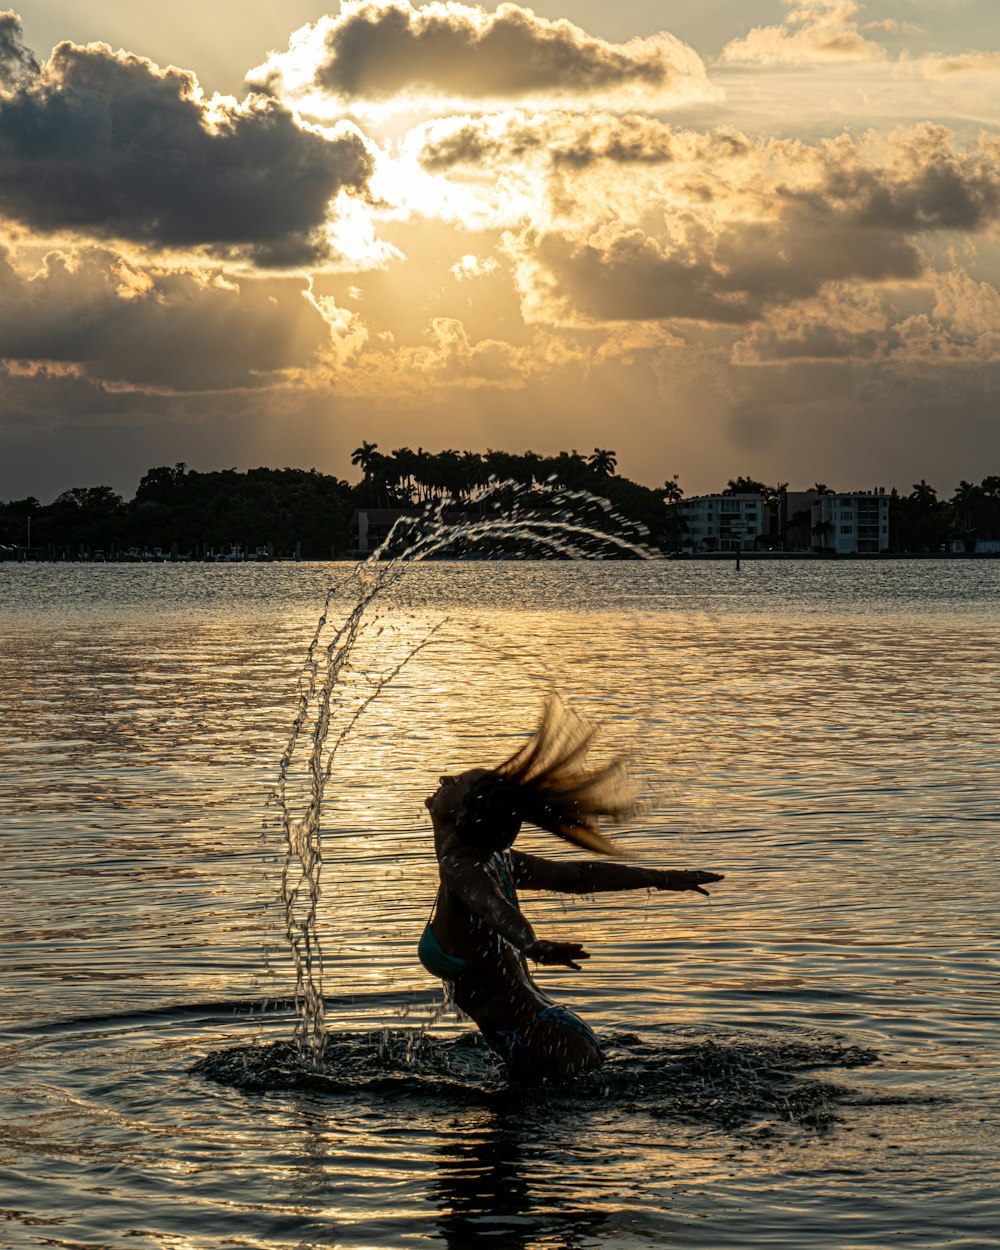 a woman in the water spraying water on her head